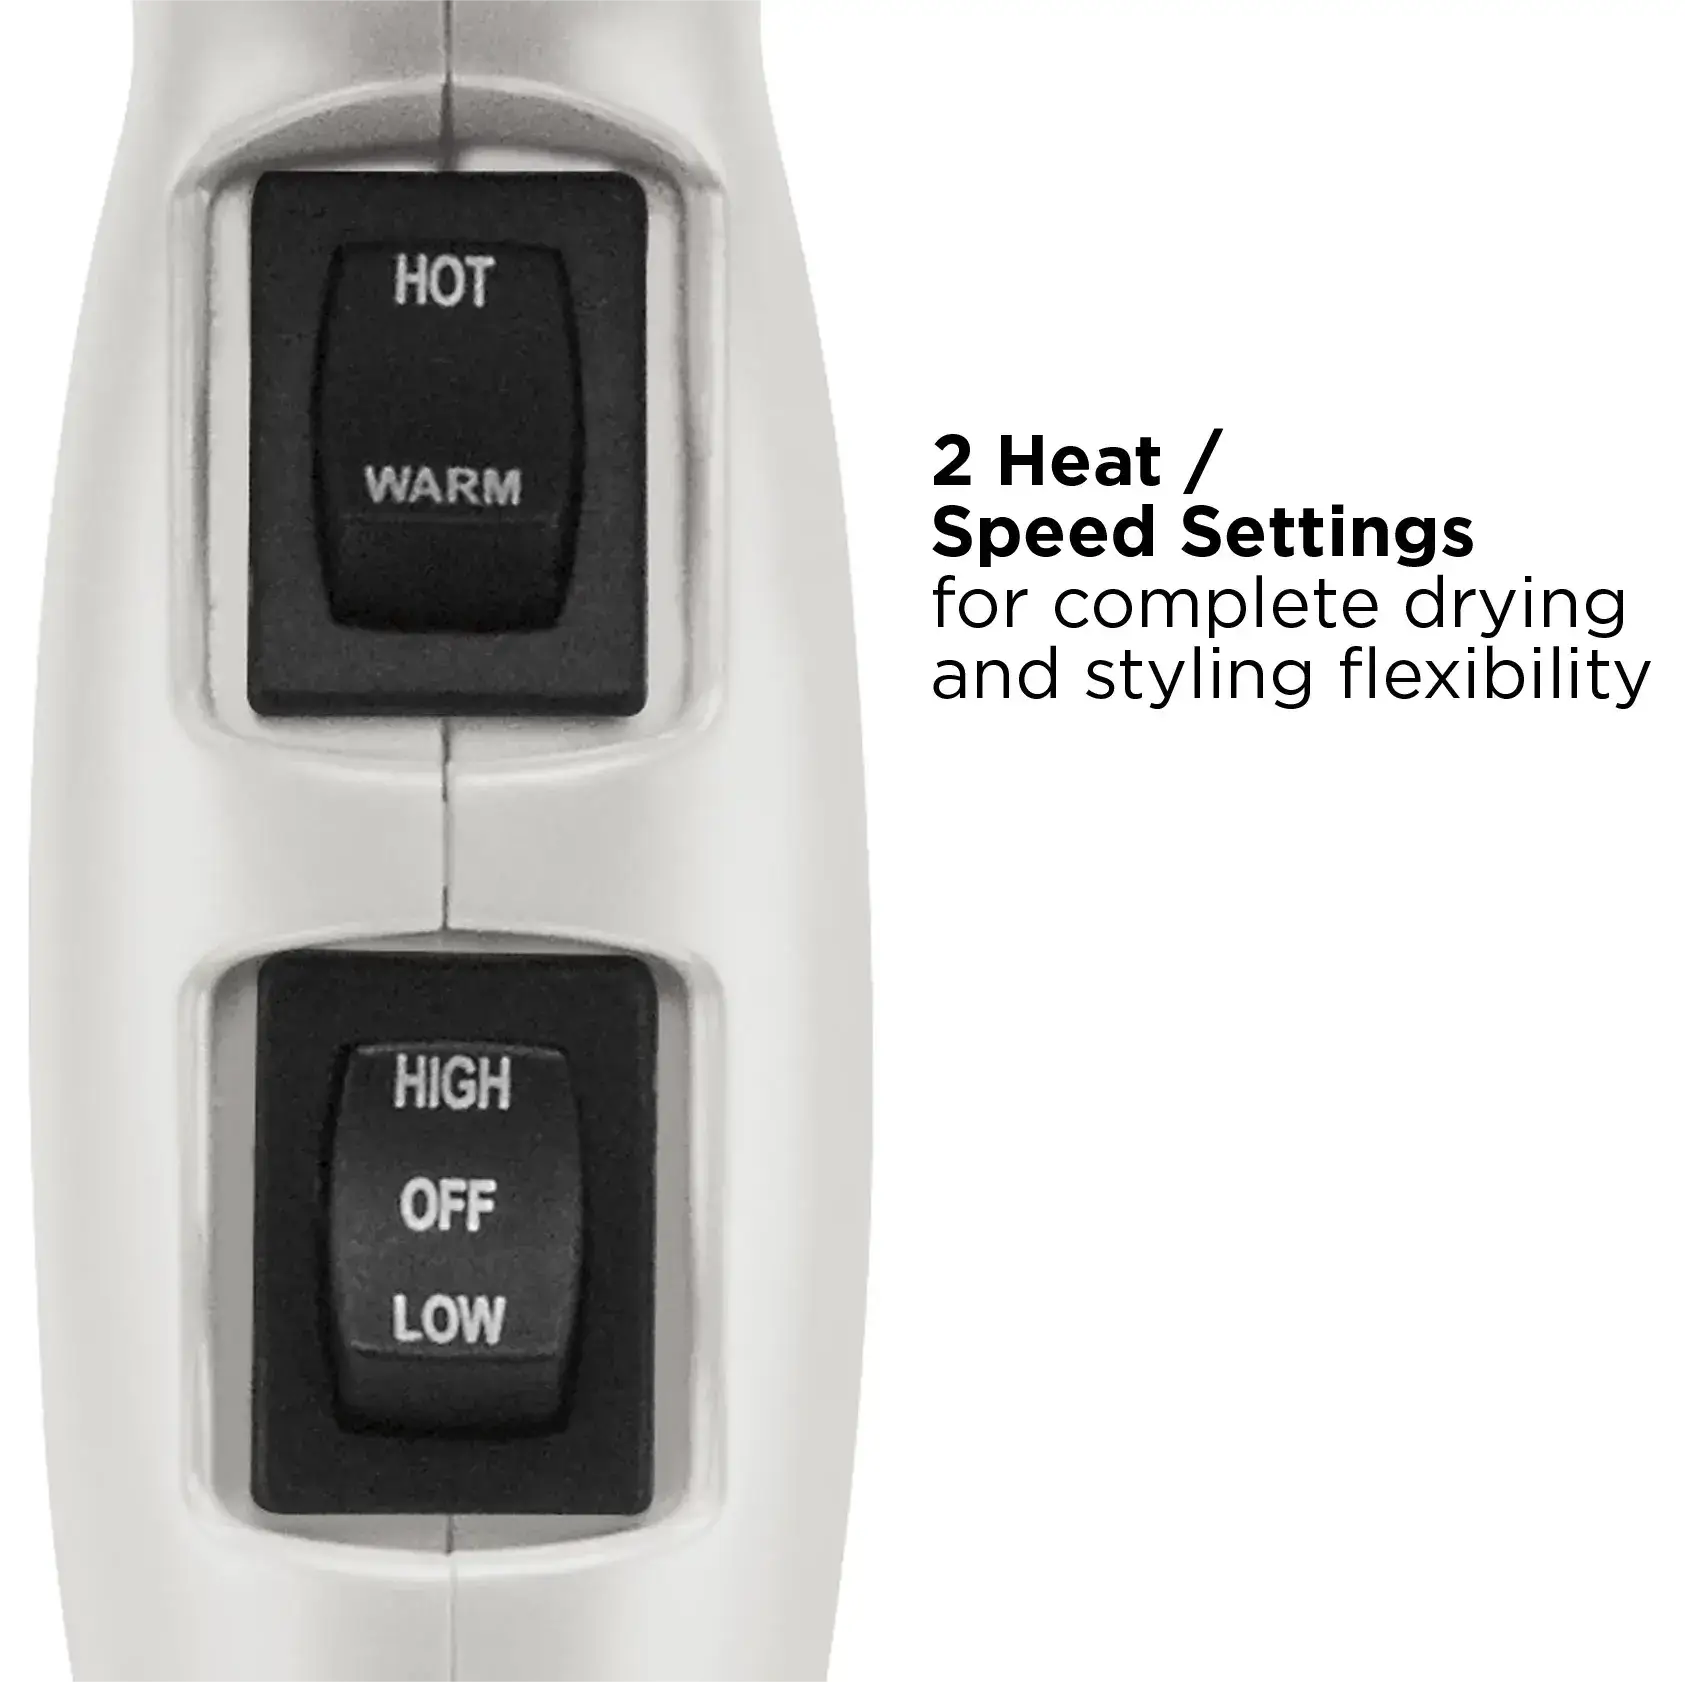 Hair dryer with two heat and speed settings controls.